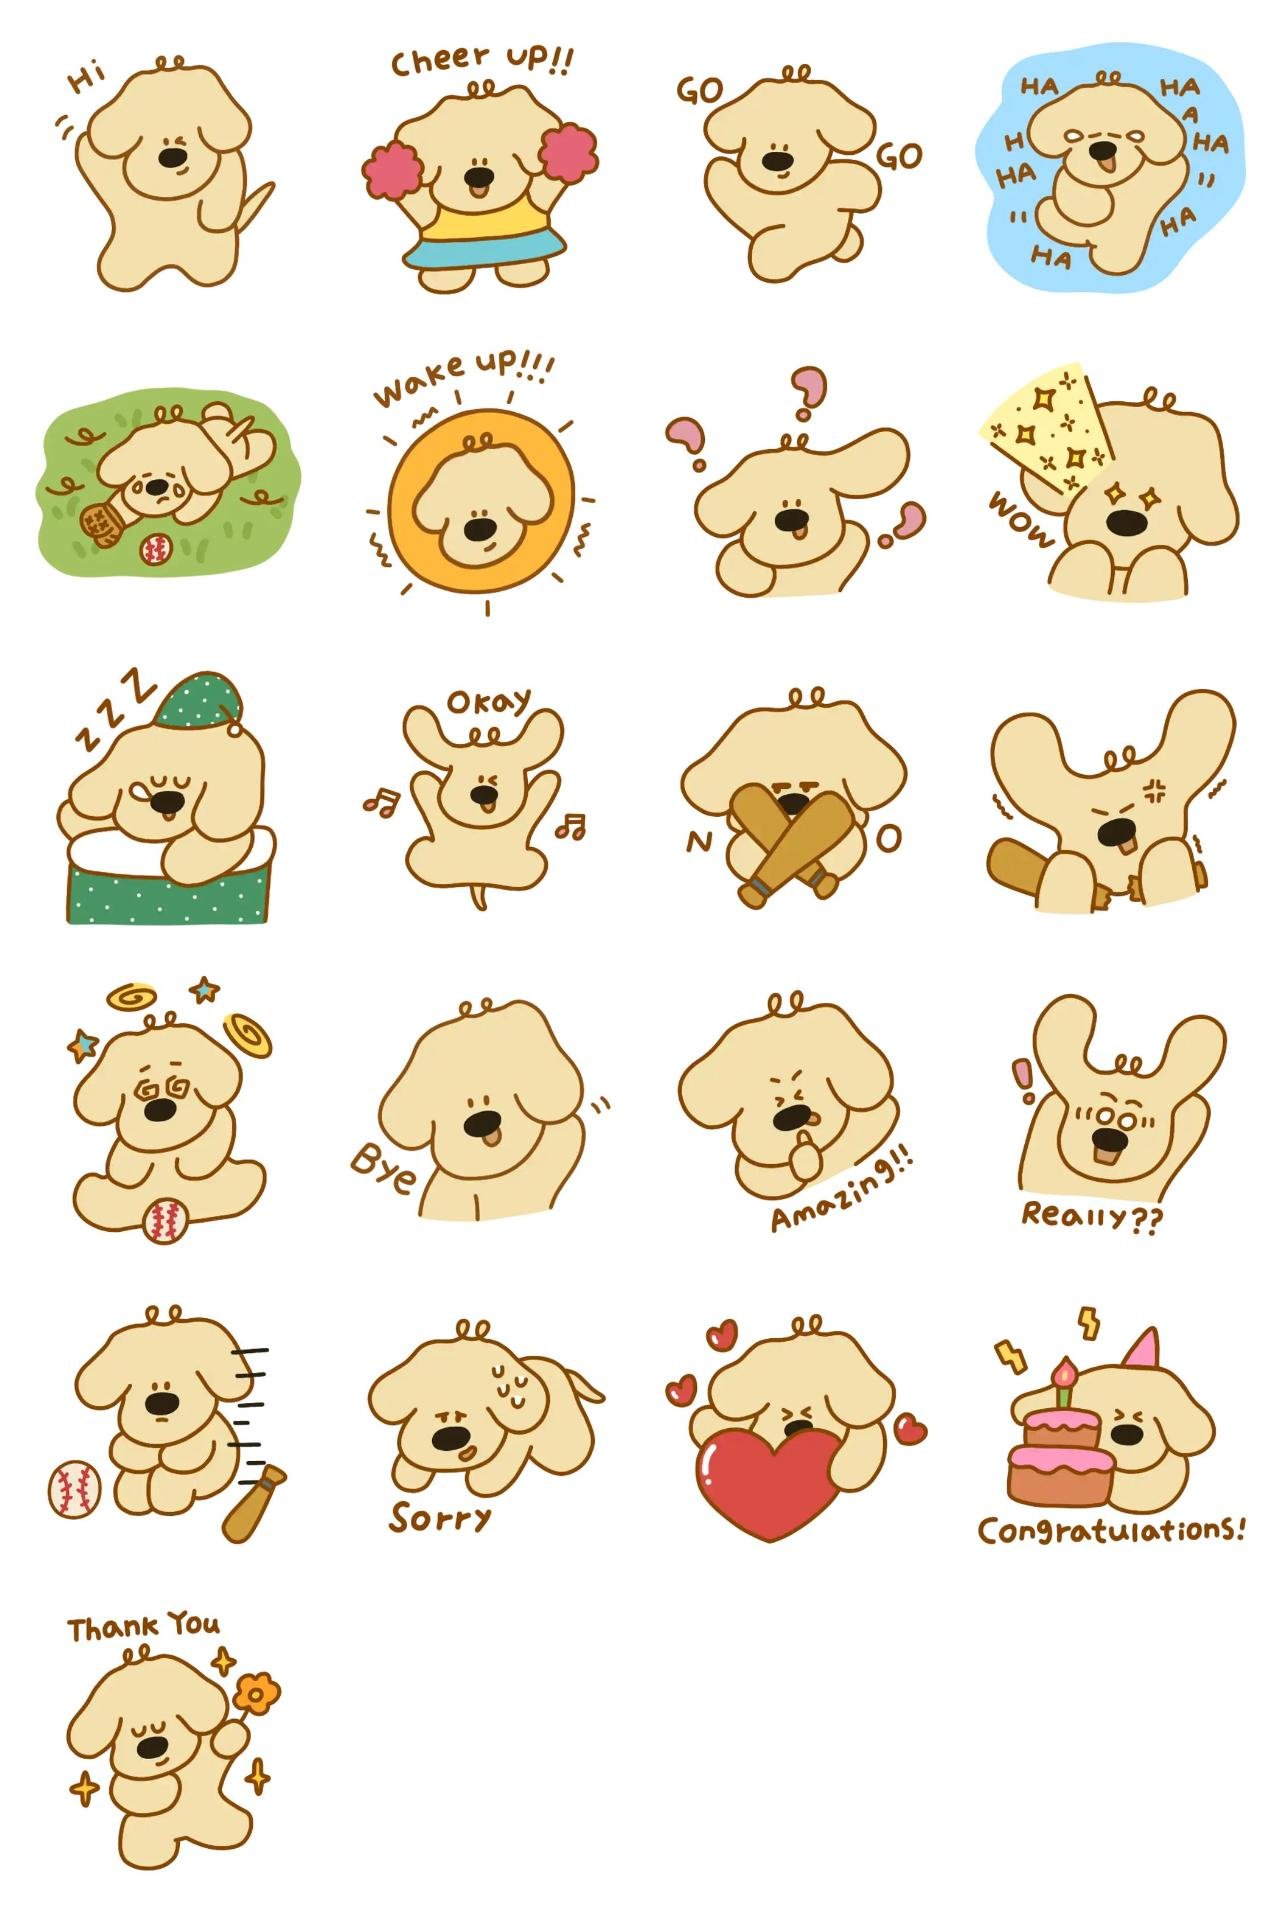 Baseball-loving dog 'Bolly' Animals,Sports sticker pack for Whatsapp, Telegram, Signal, and others chatting and message apps